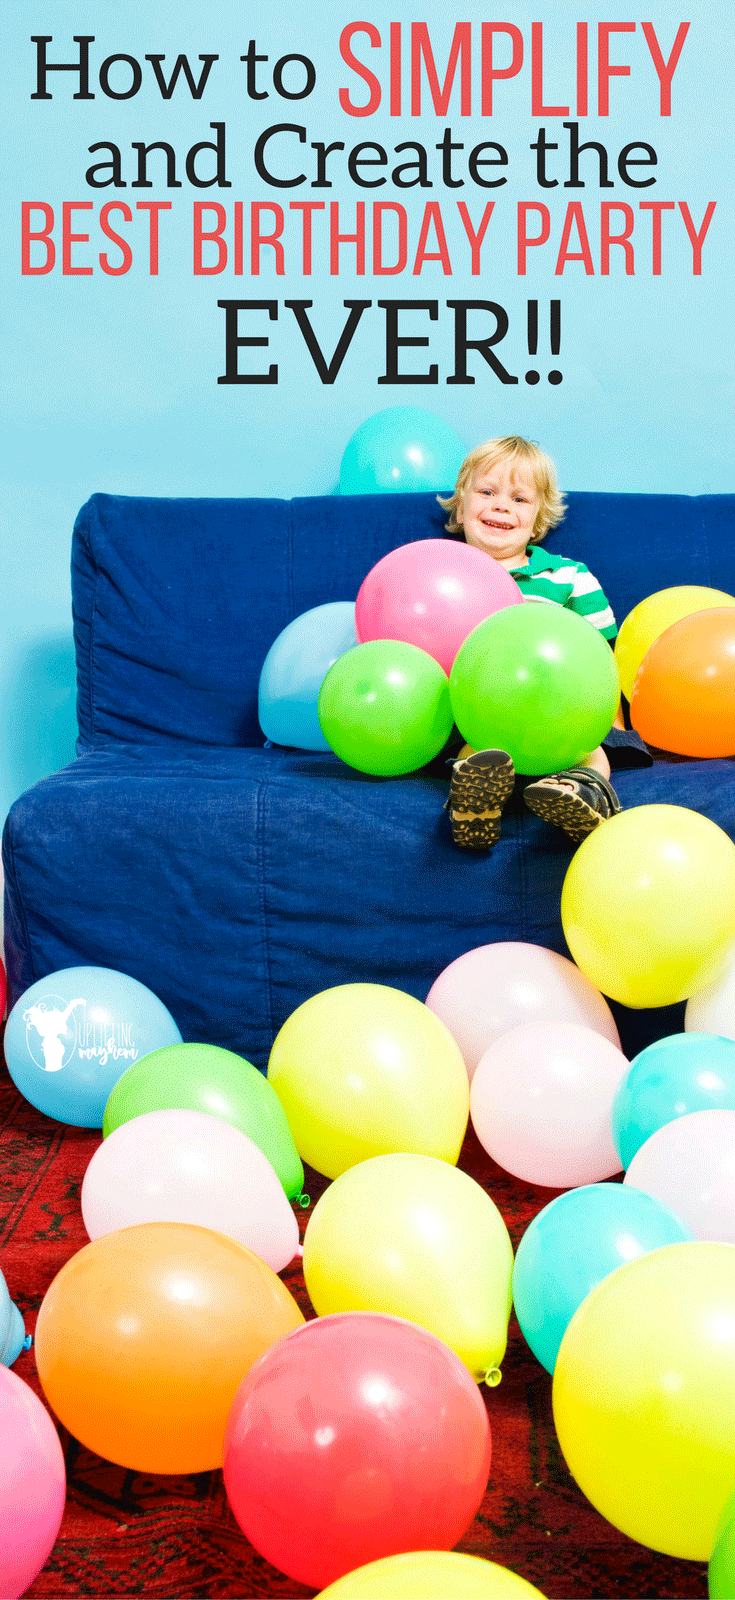 How to Simplify and Create the Best Birthday Party EVER